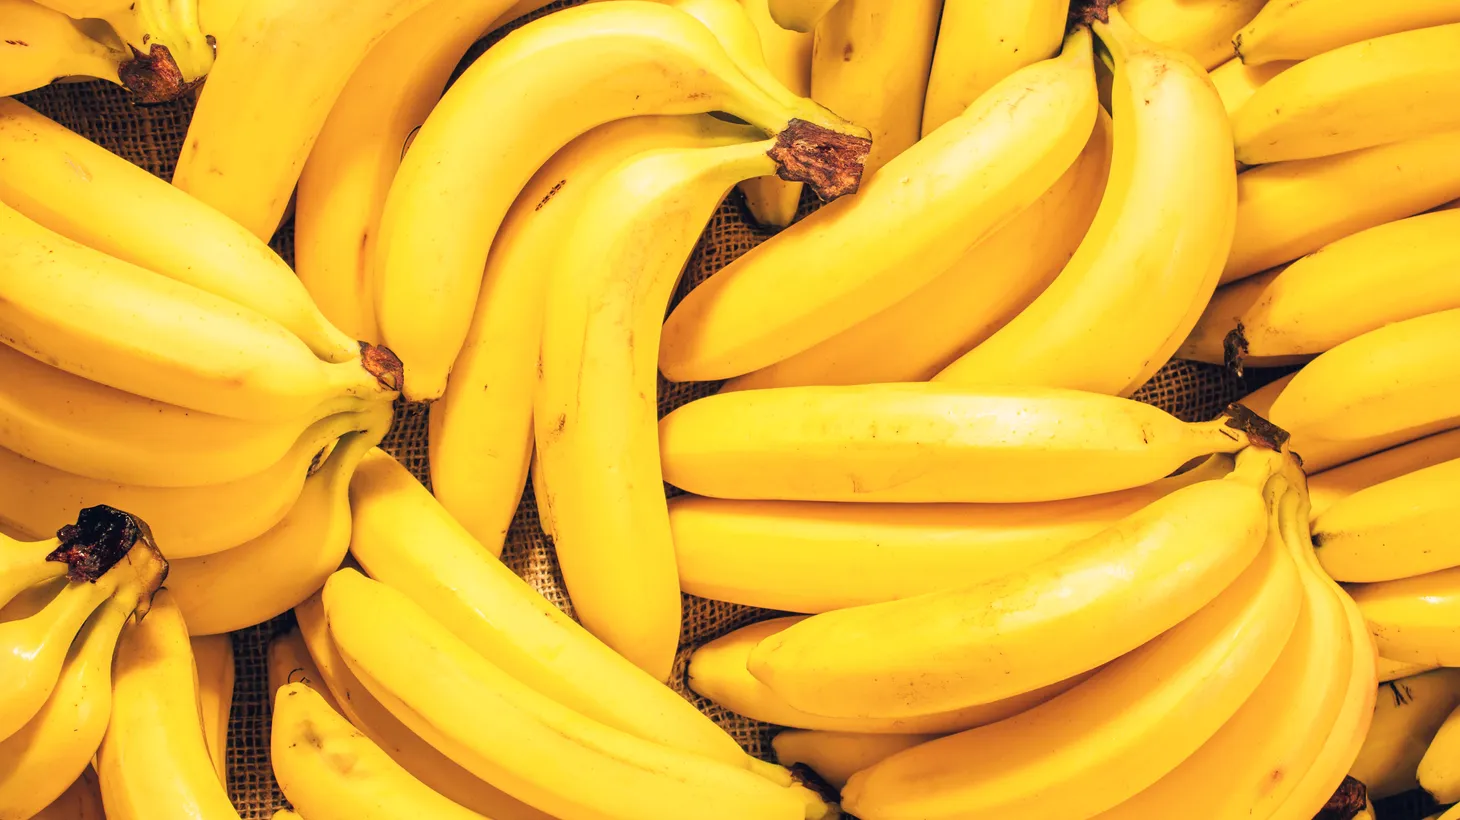 India has broader access to banana varieties compared to the Cavendish which is most popular in the United States.